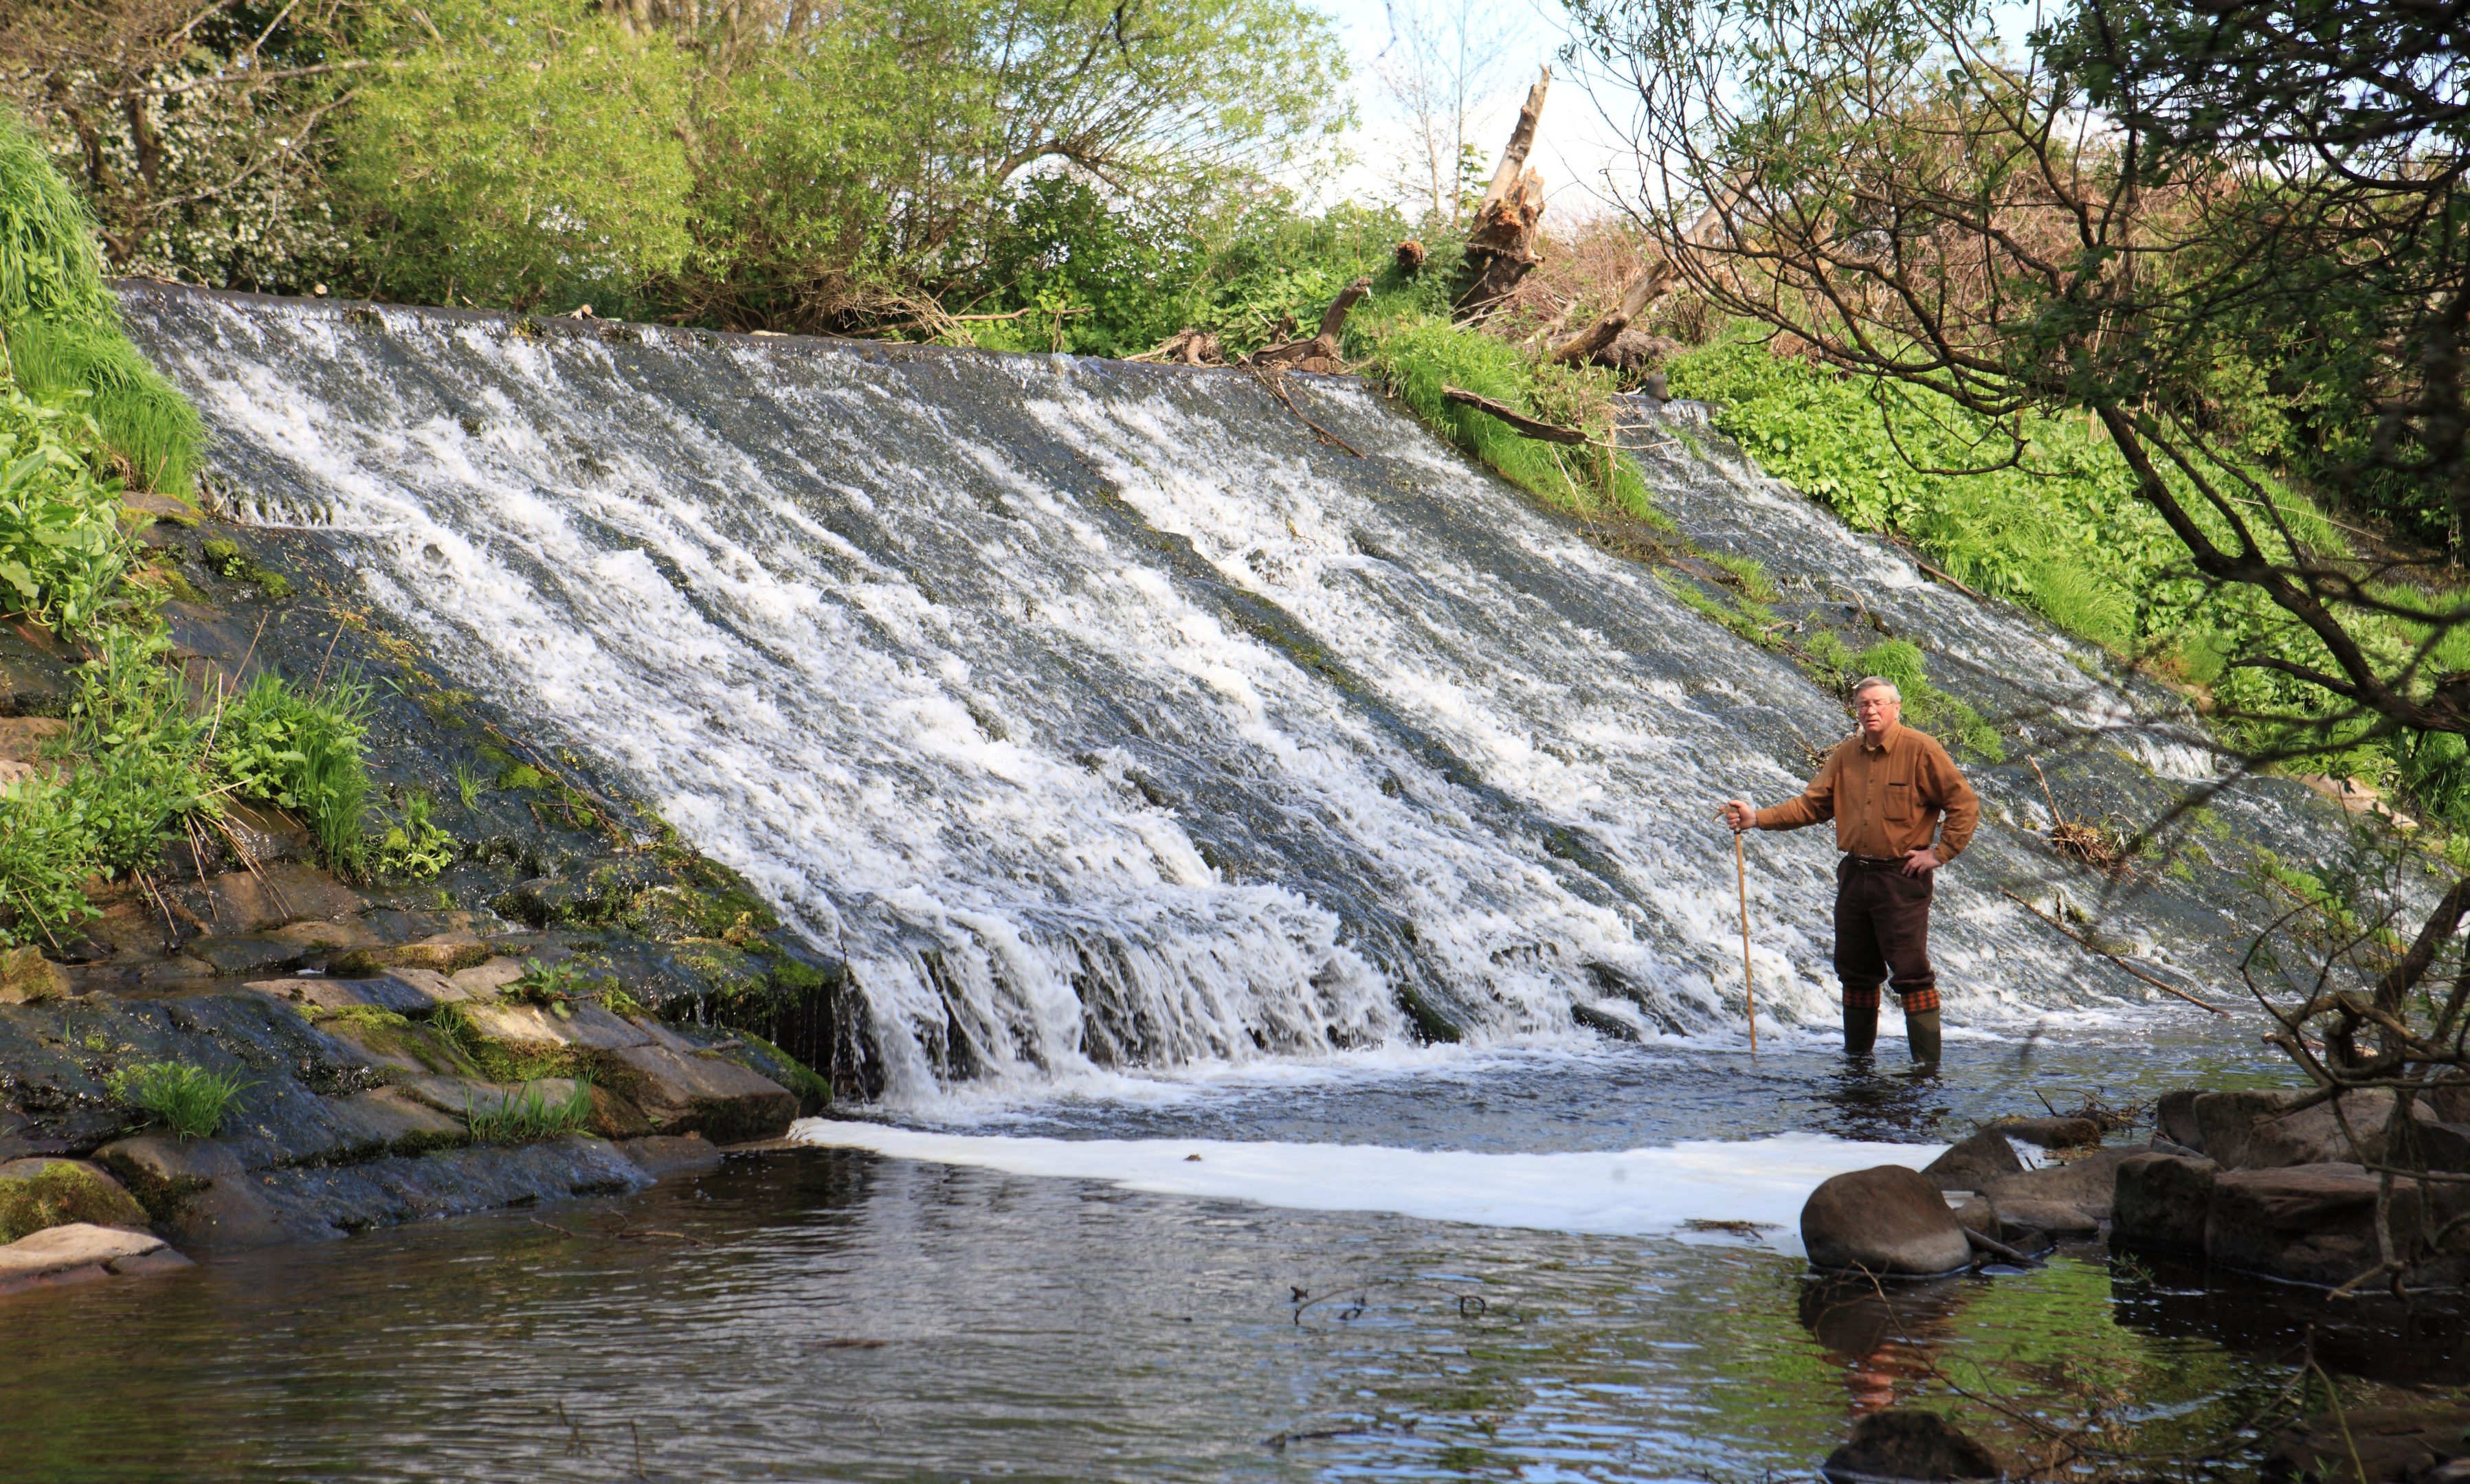 Michael Smith at the Luncarty weir.